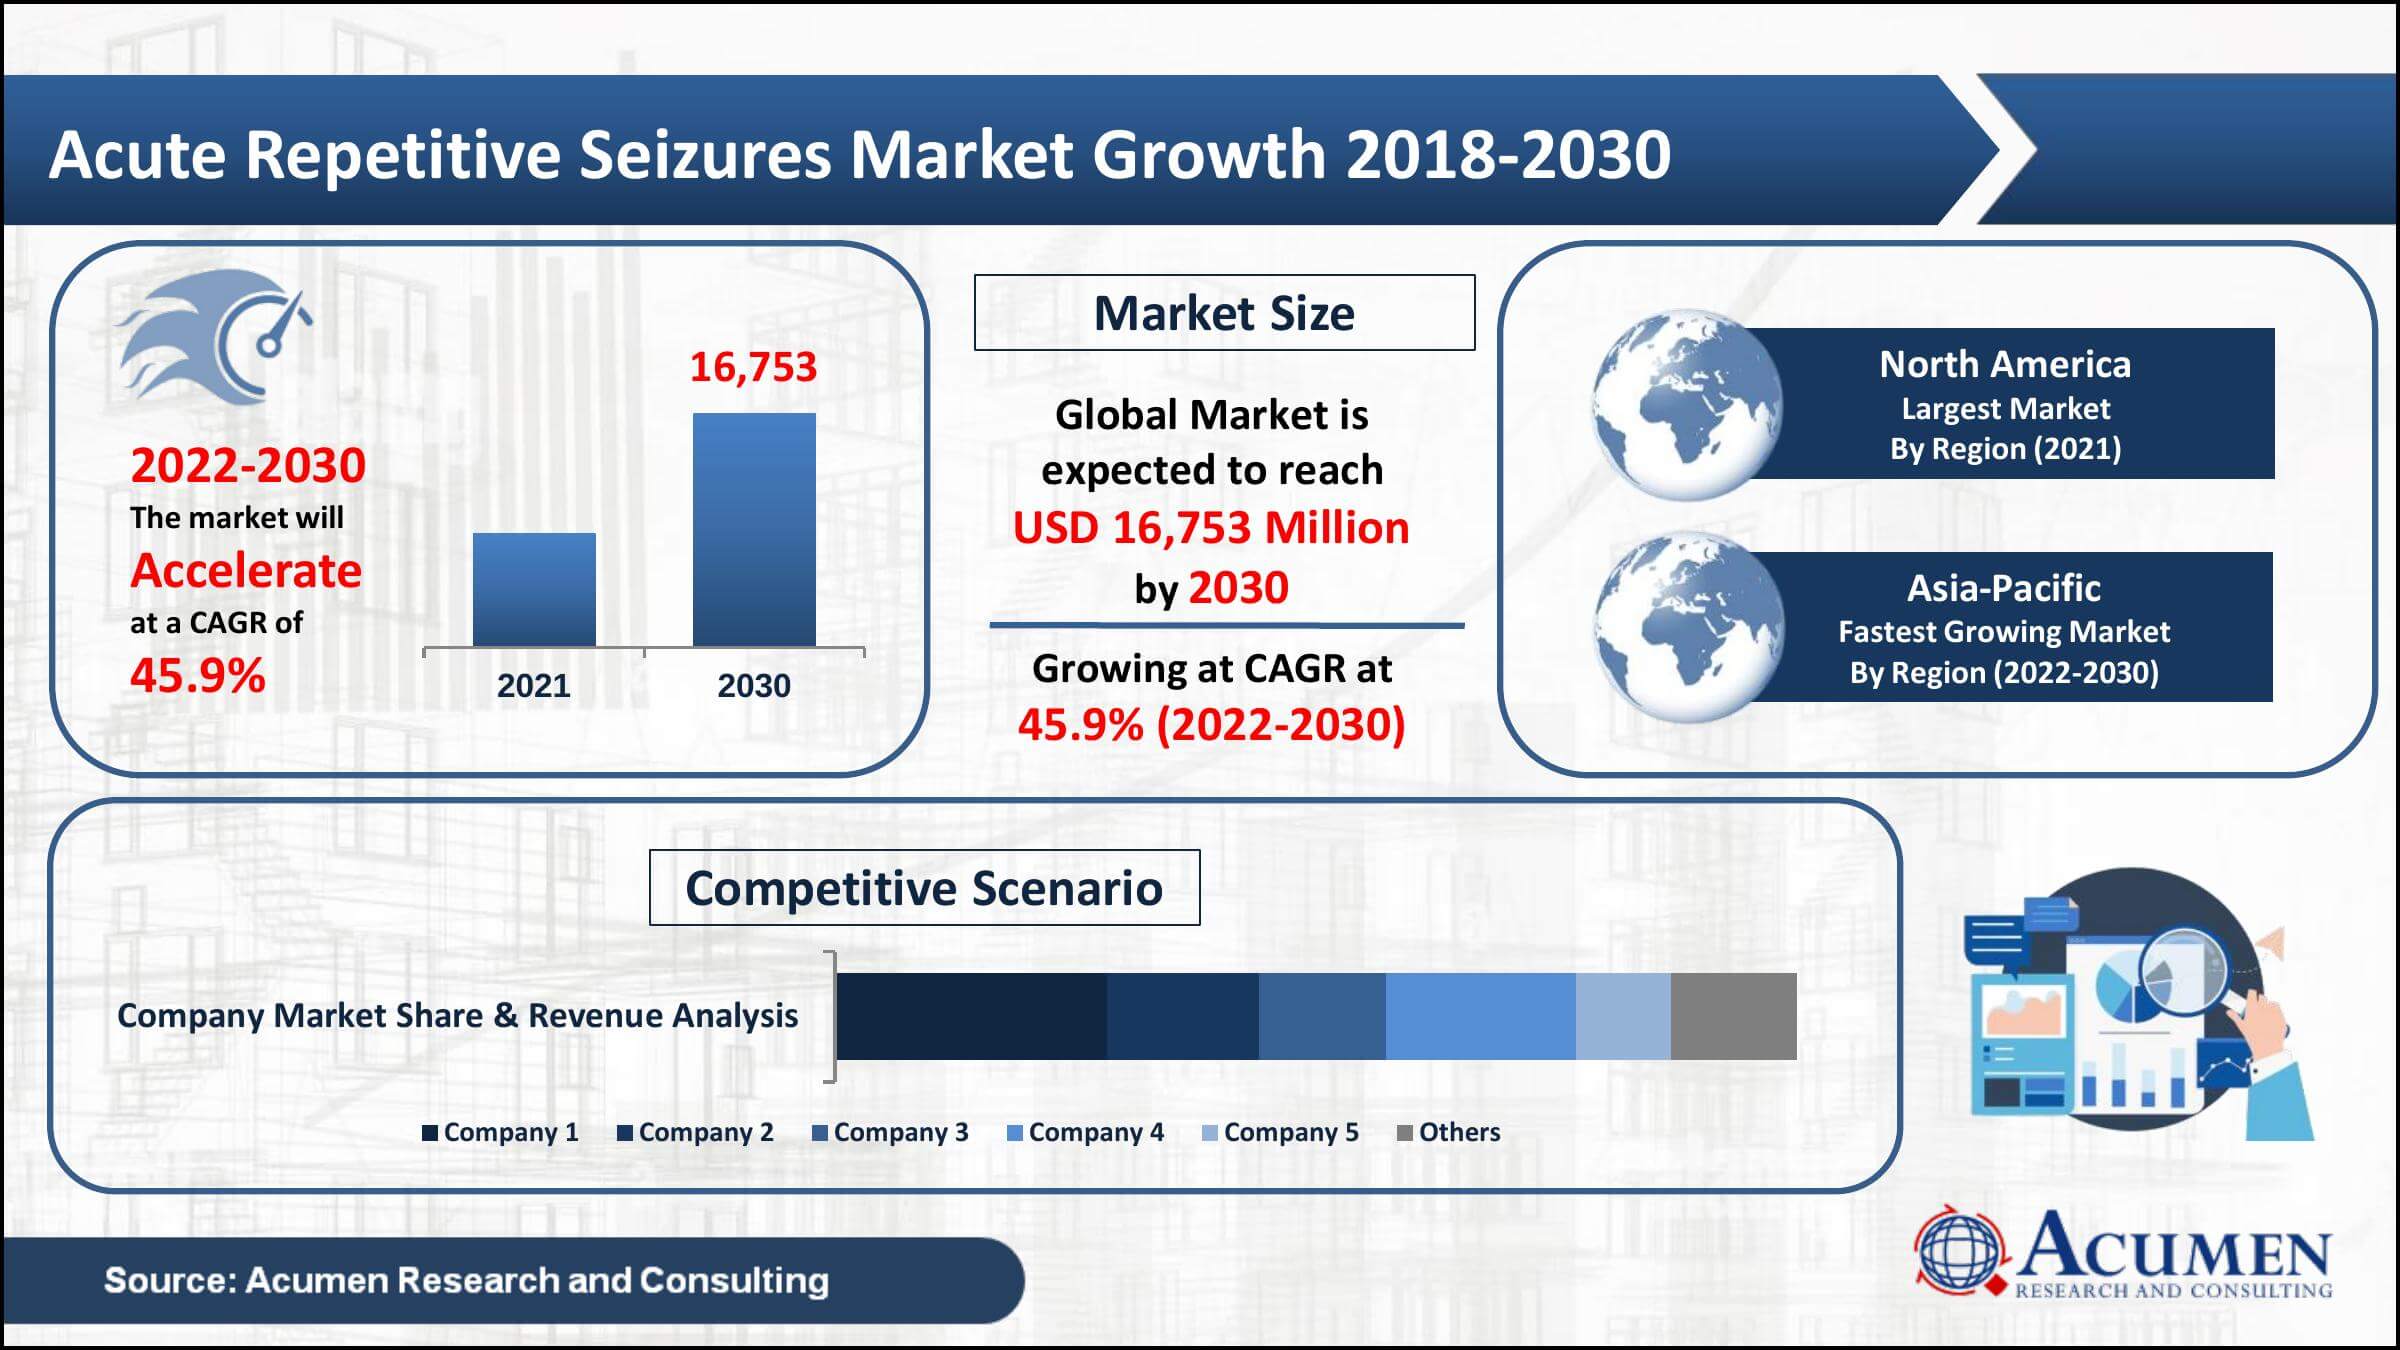 Global acute repetitive seizures market value was worth USD 569 Million in 2021, with a 45.9% CAGR from 2022 to 2030